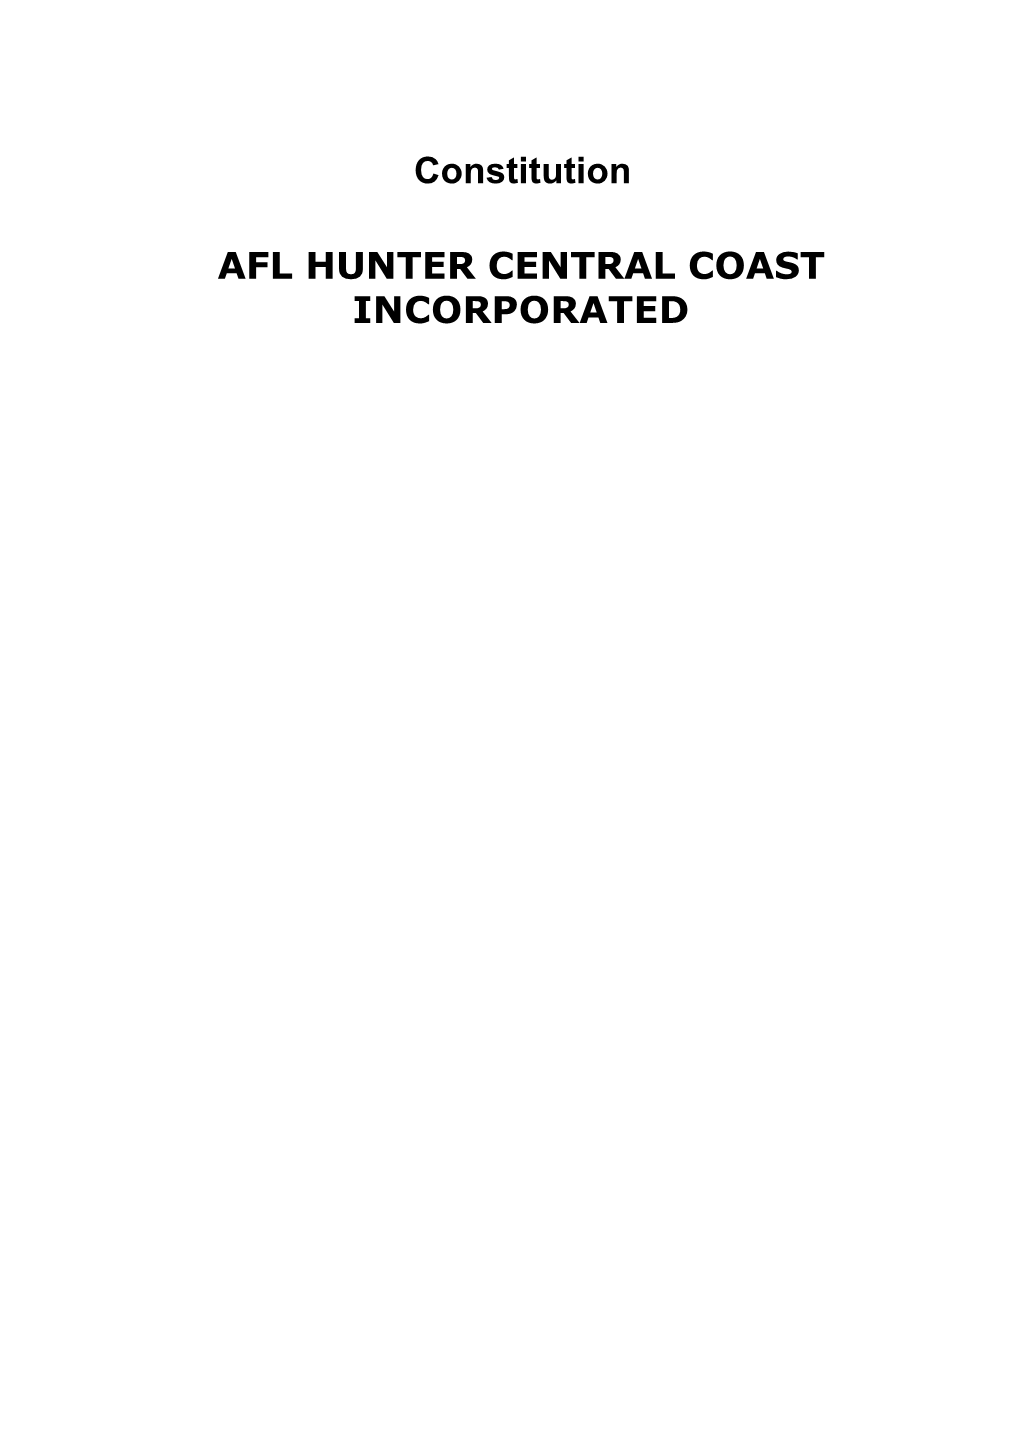 Constitution AFL HUNTER CENTRAL COAST INCORPORATED